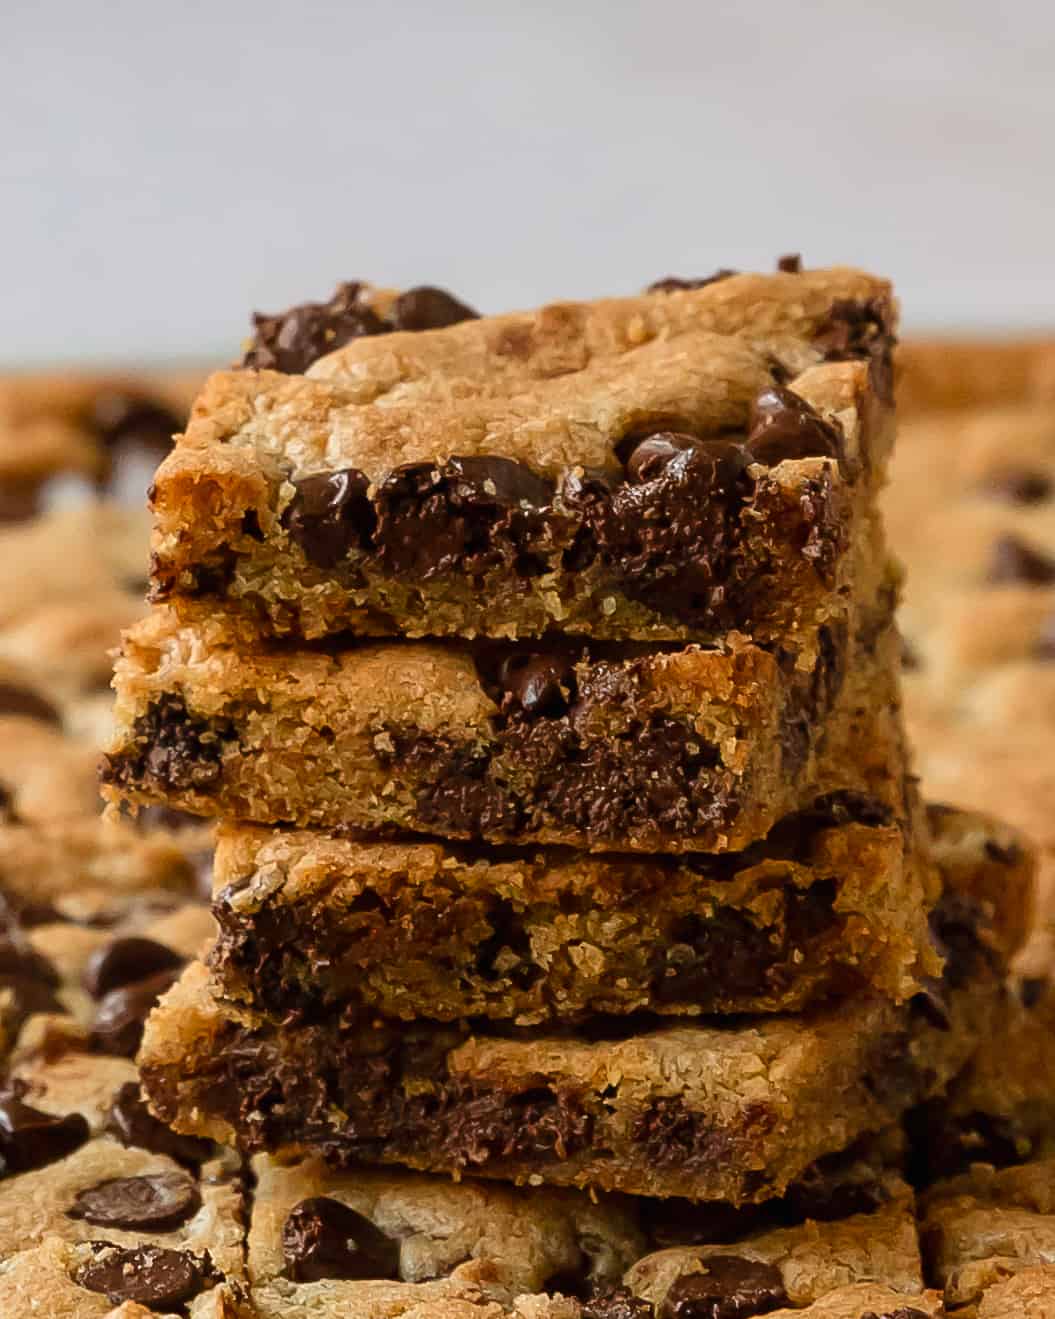 Toll House cookie bars are buttery, soft and chewy chocolate chip cookie bars inspired by the classic original Nestlé Toll House chocolate chip cookie recipe. Grab two bowls, a whisk or spoon and make these easy chocolate chip pan cookies the next time you need a quick and delicious dessert everyone is sure to love!